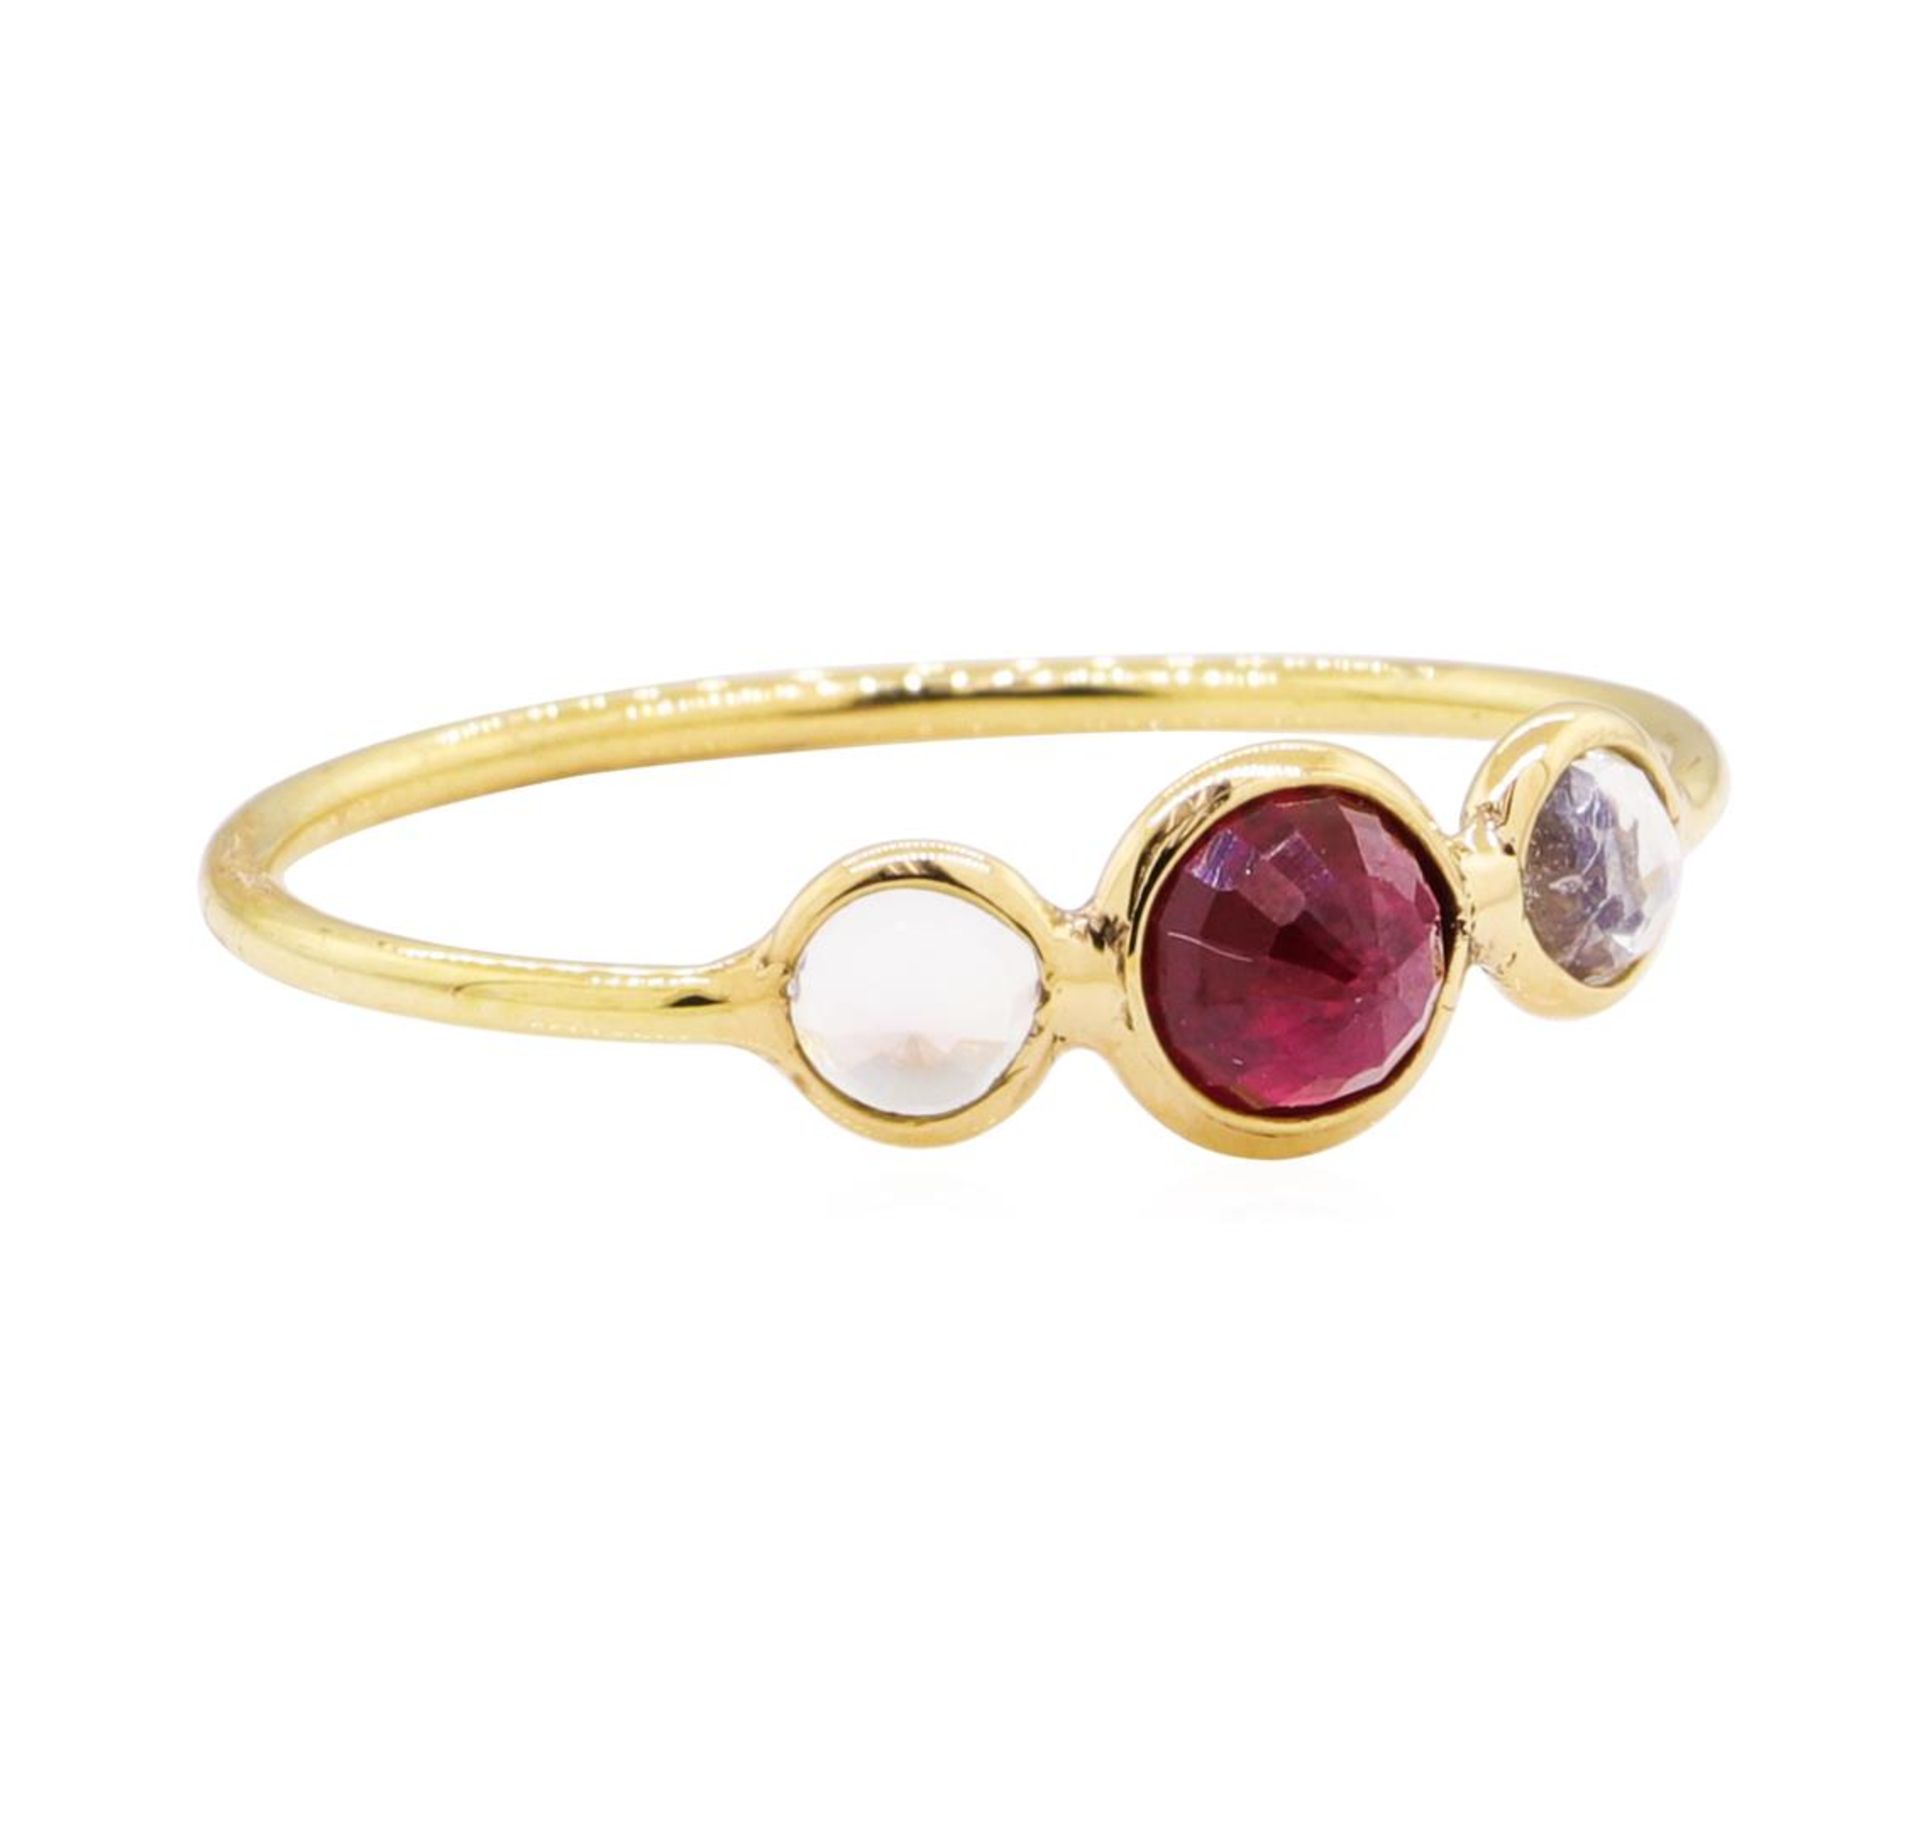 1.20ctw Ruby and Moonstone Ring - 18KT Yellow Gold